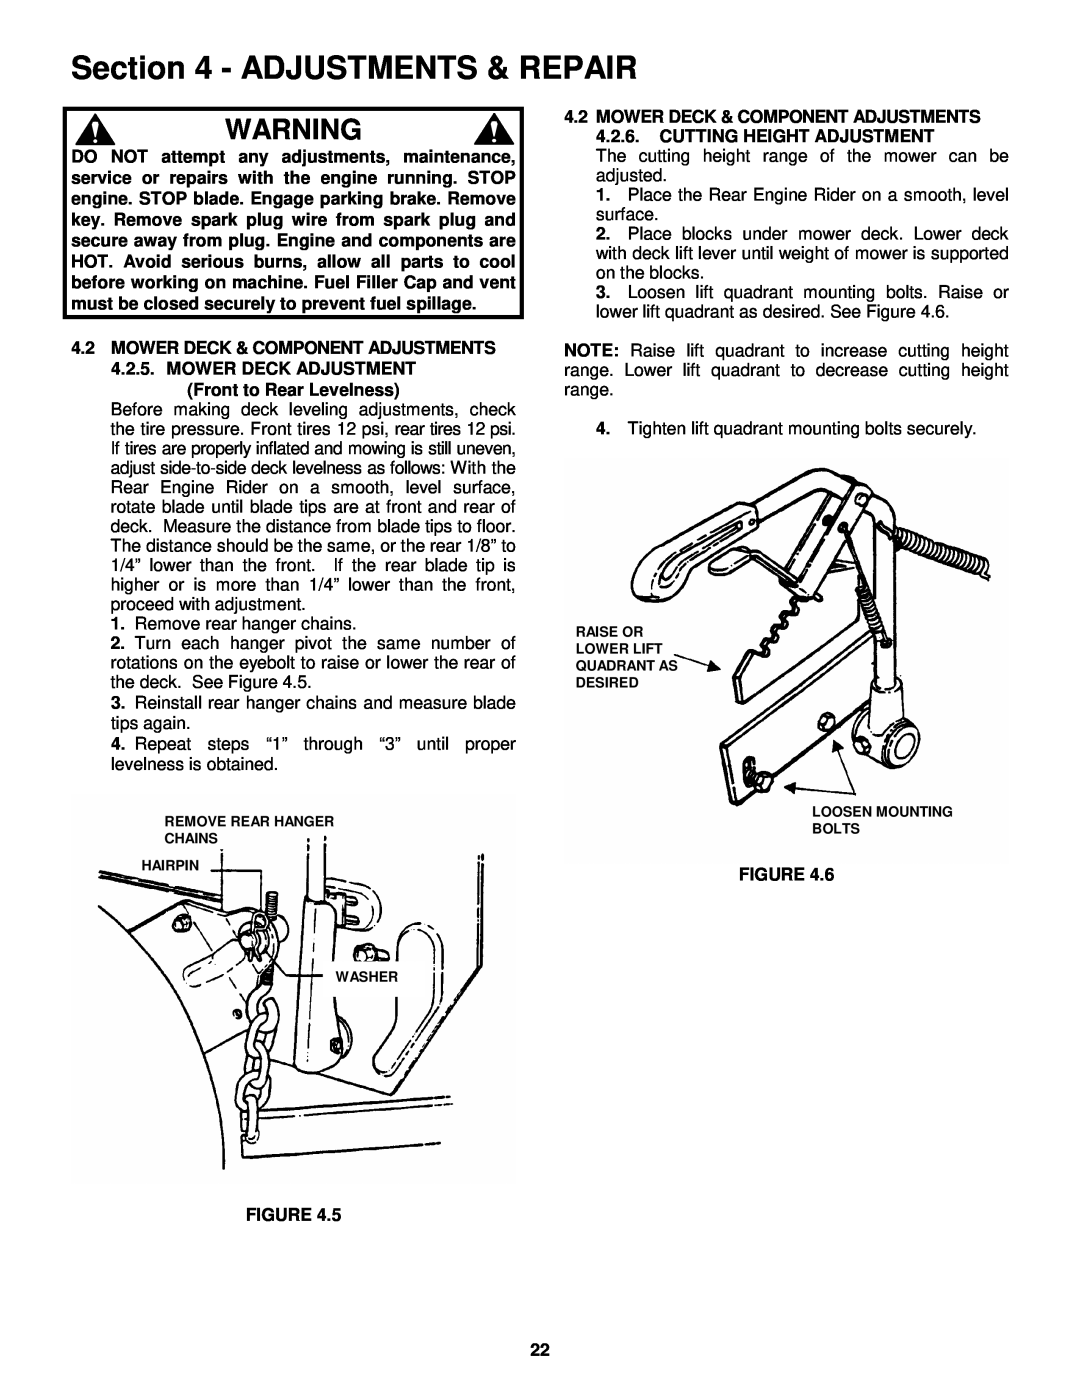 Snapper 421823BVE, W421623BVE important safety instructions Adjustments & Repair, Remove rear hanger chains 